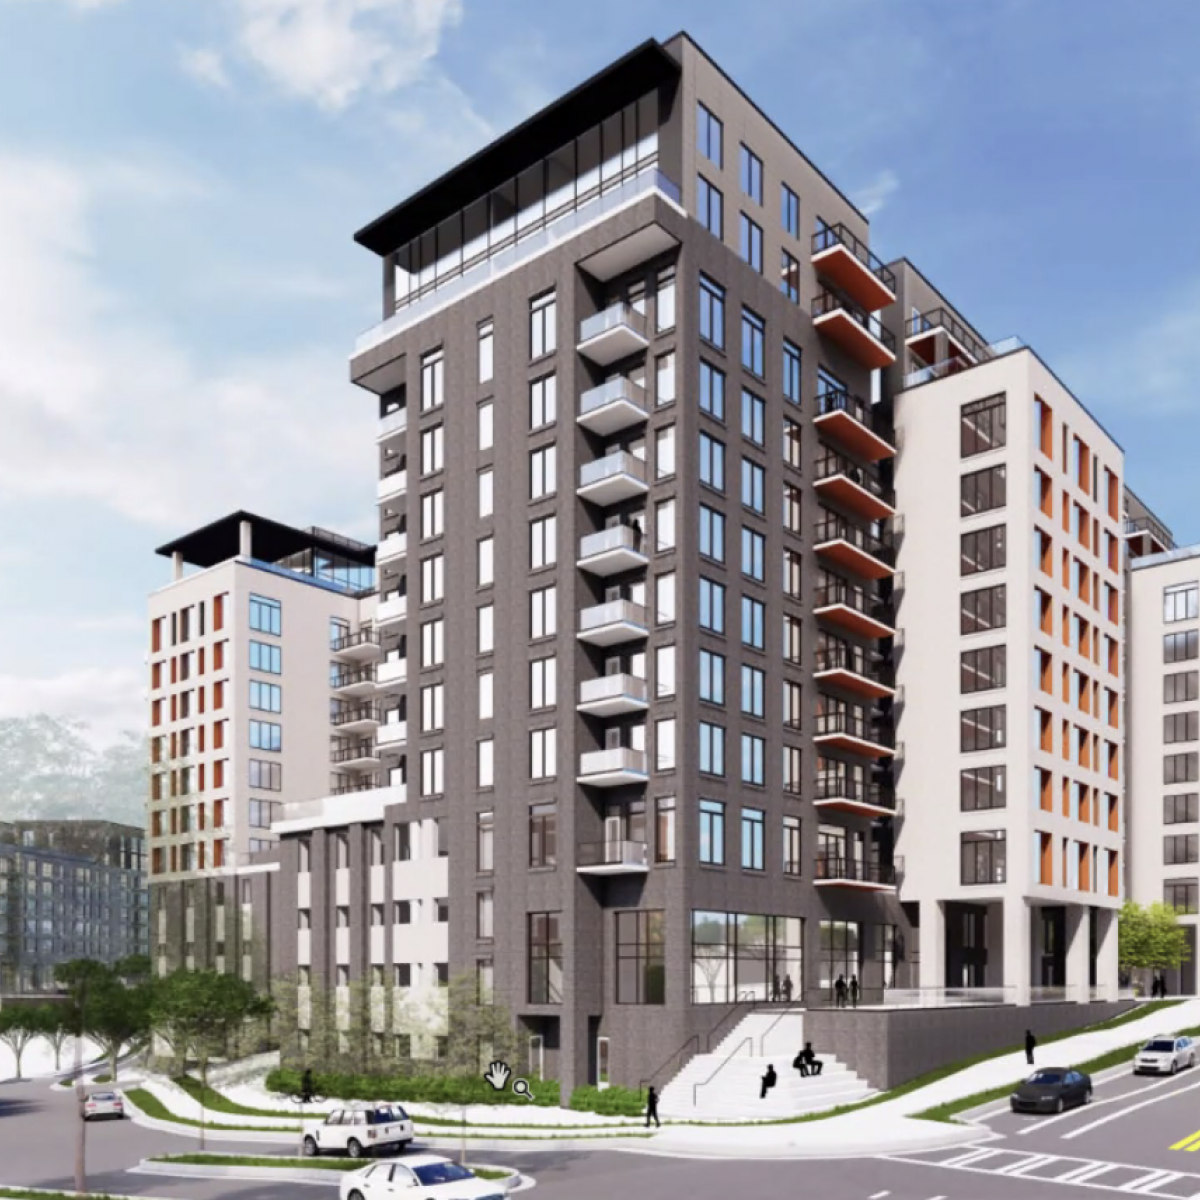 Jamestown continues to develop the Buckhead Village District with the  community in mind - Buckhead